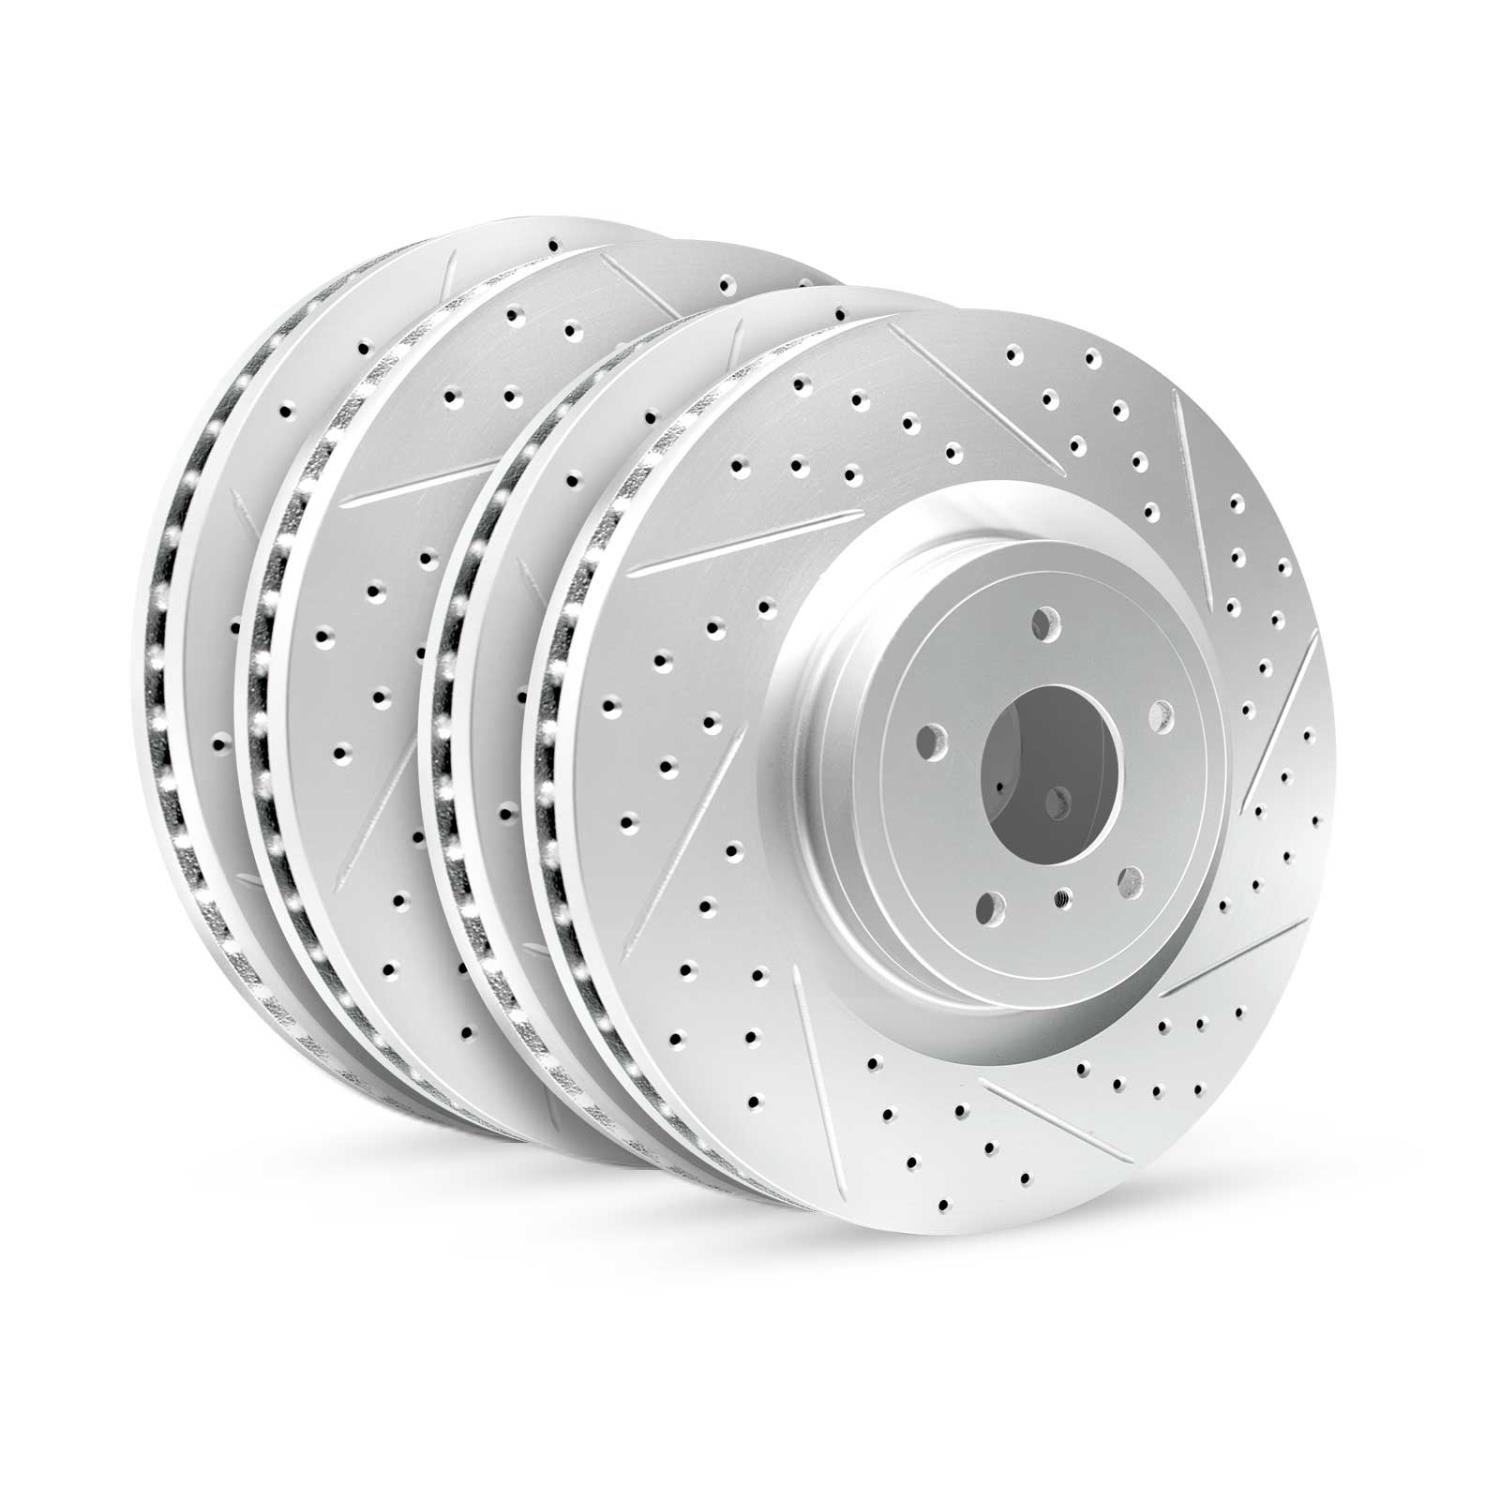 GEO-Carbon Drilled/Slotted Rotors, Fits Select Multiple Makes/Models, Position: Front/Rear